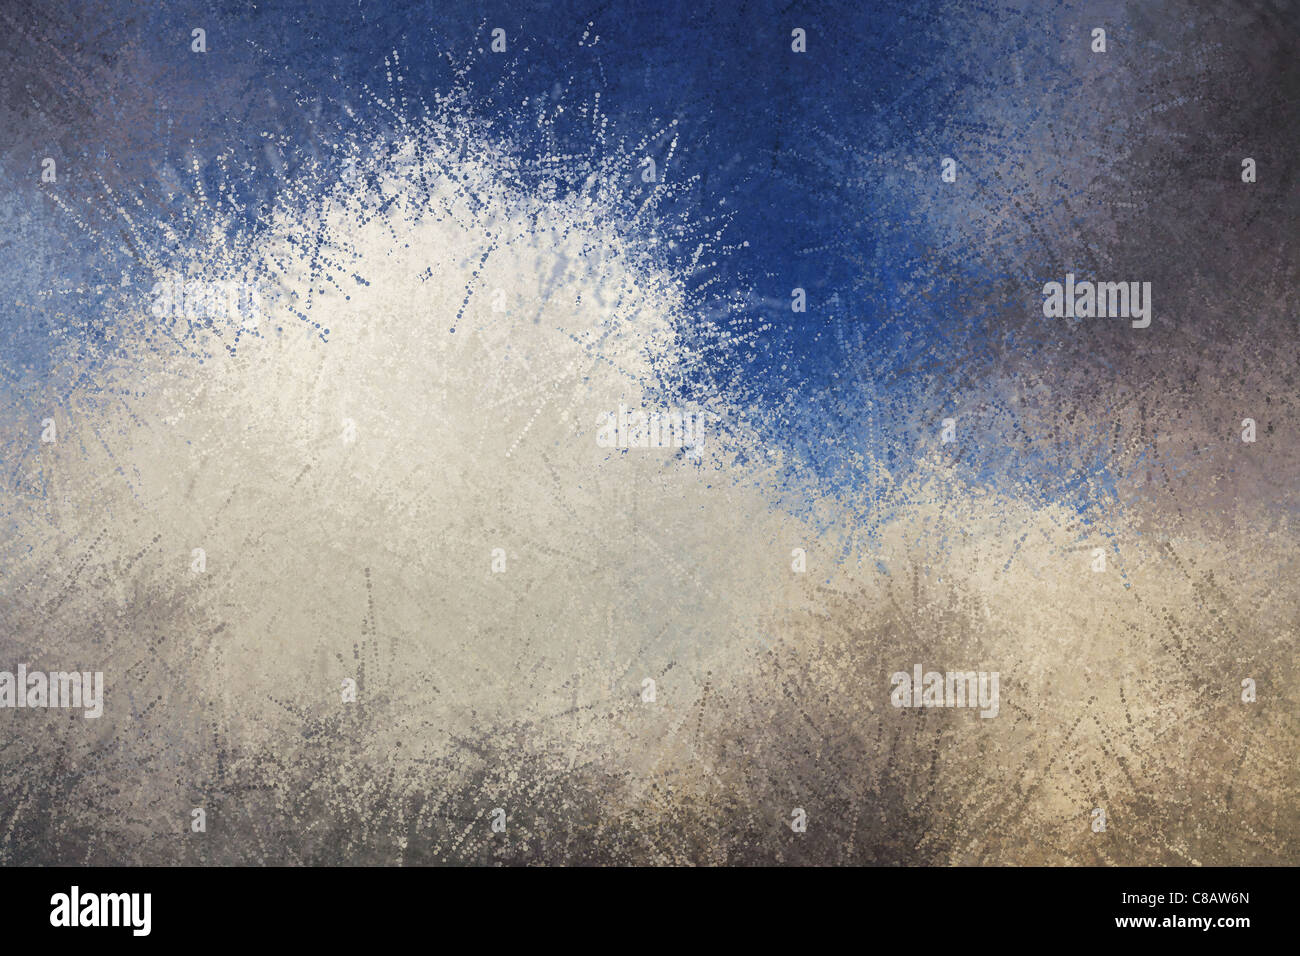 Abstract background painting of dot splatters in blue and grays Stock Photo